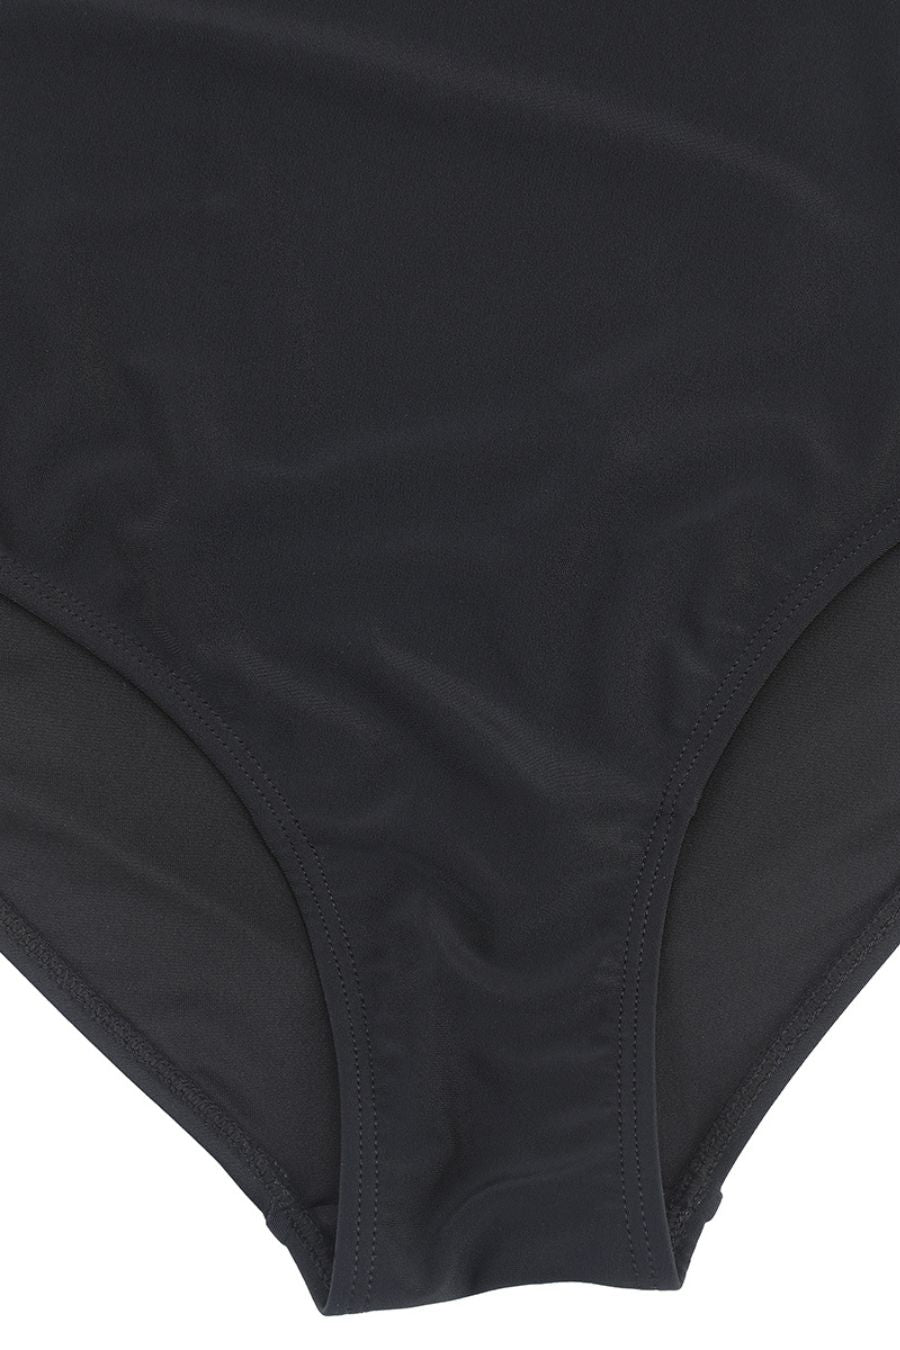 Diosa Shaping Swimsuit - Black Contour Clothing